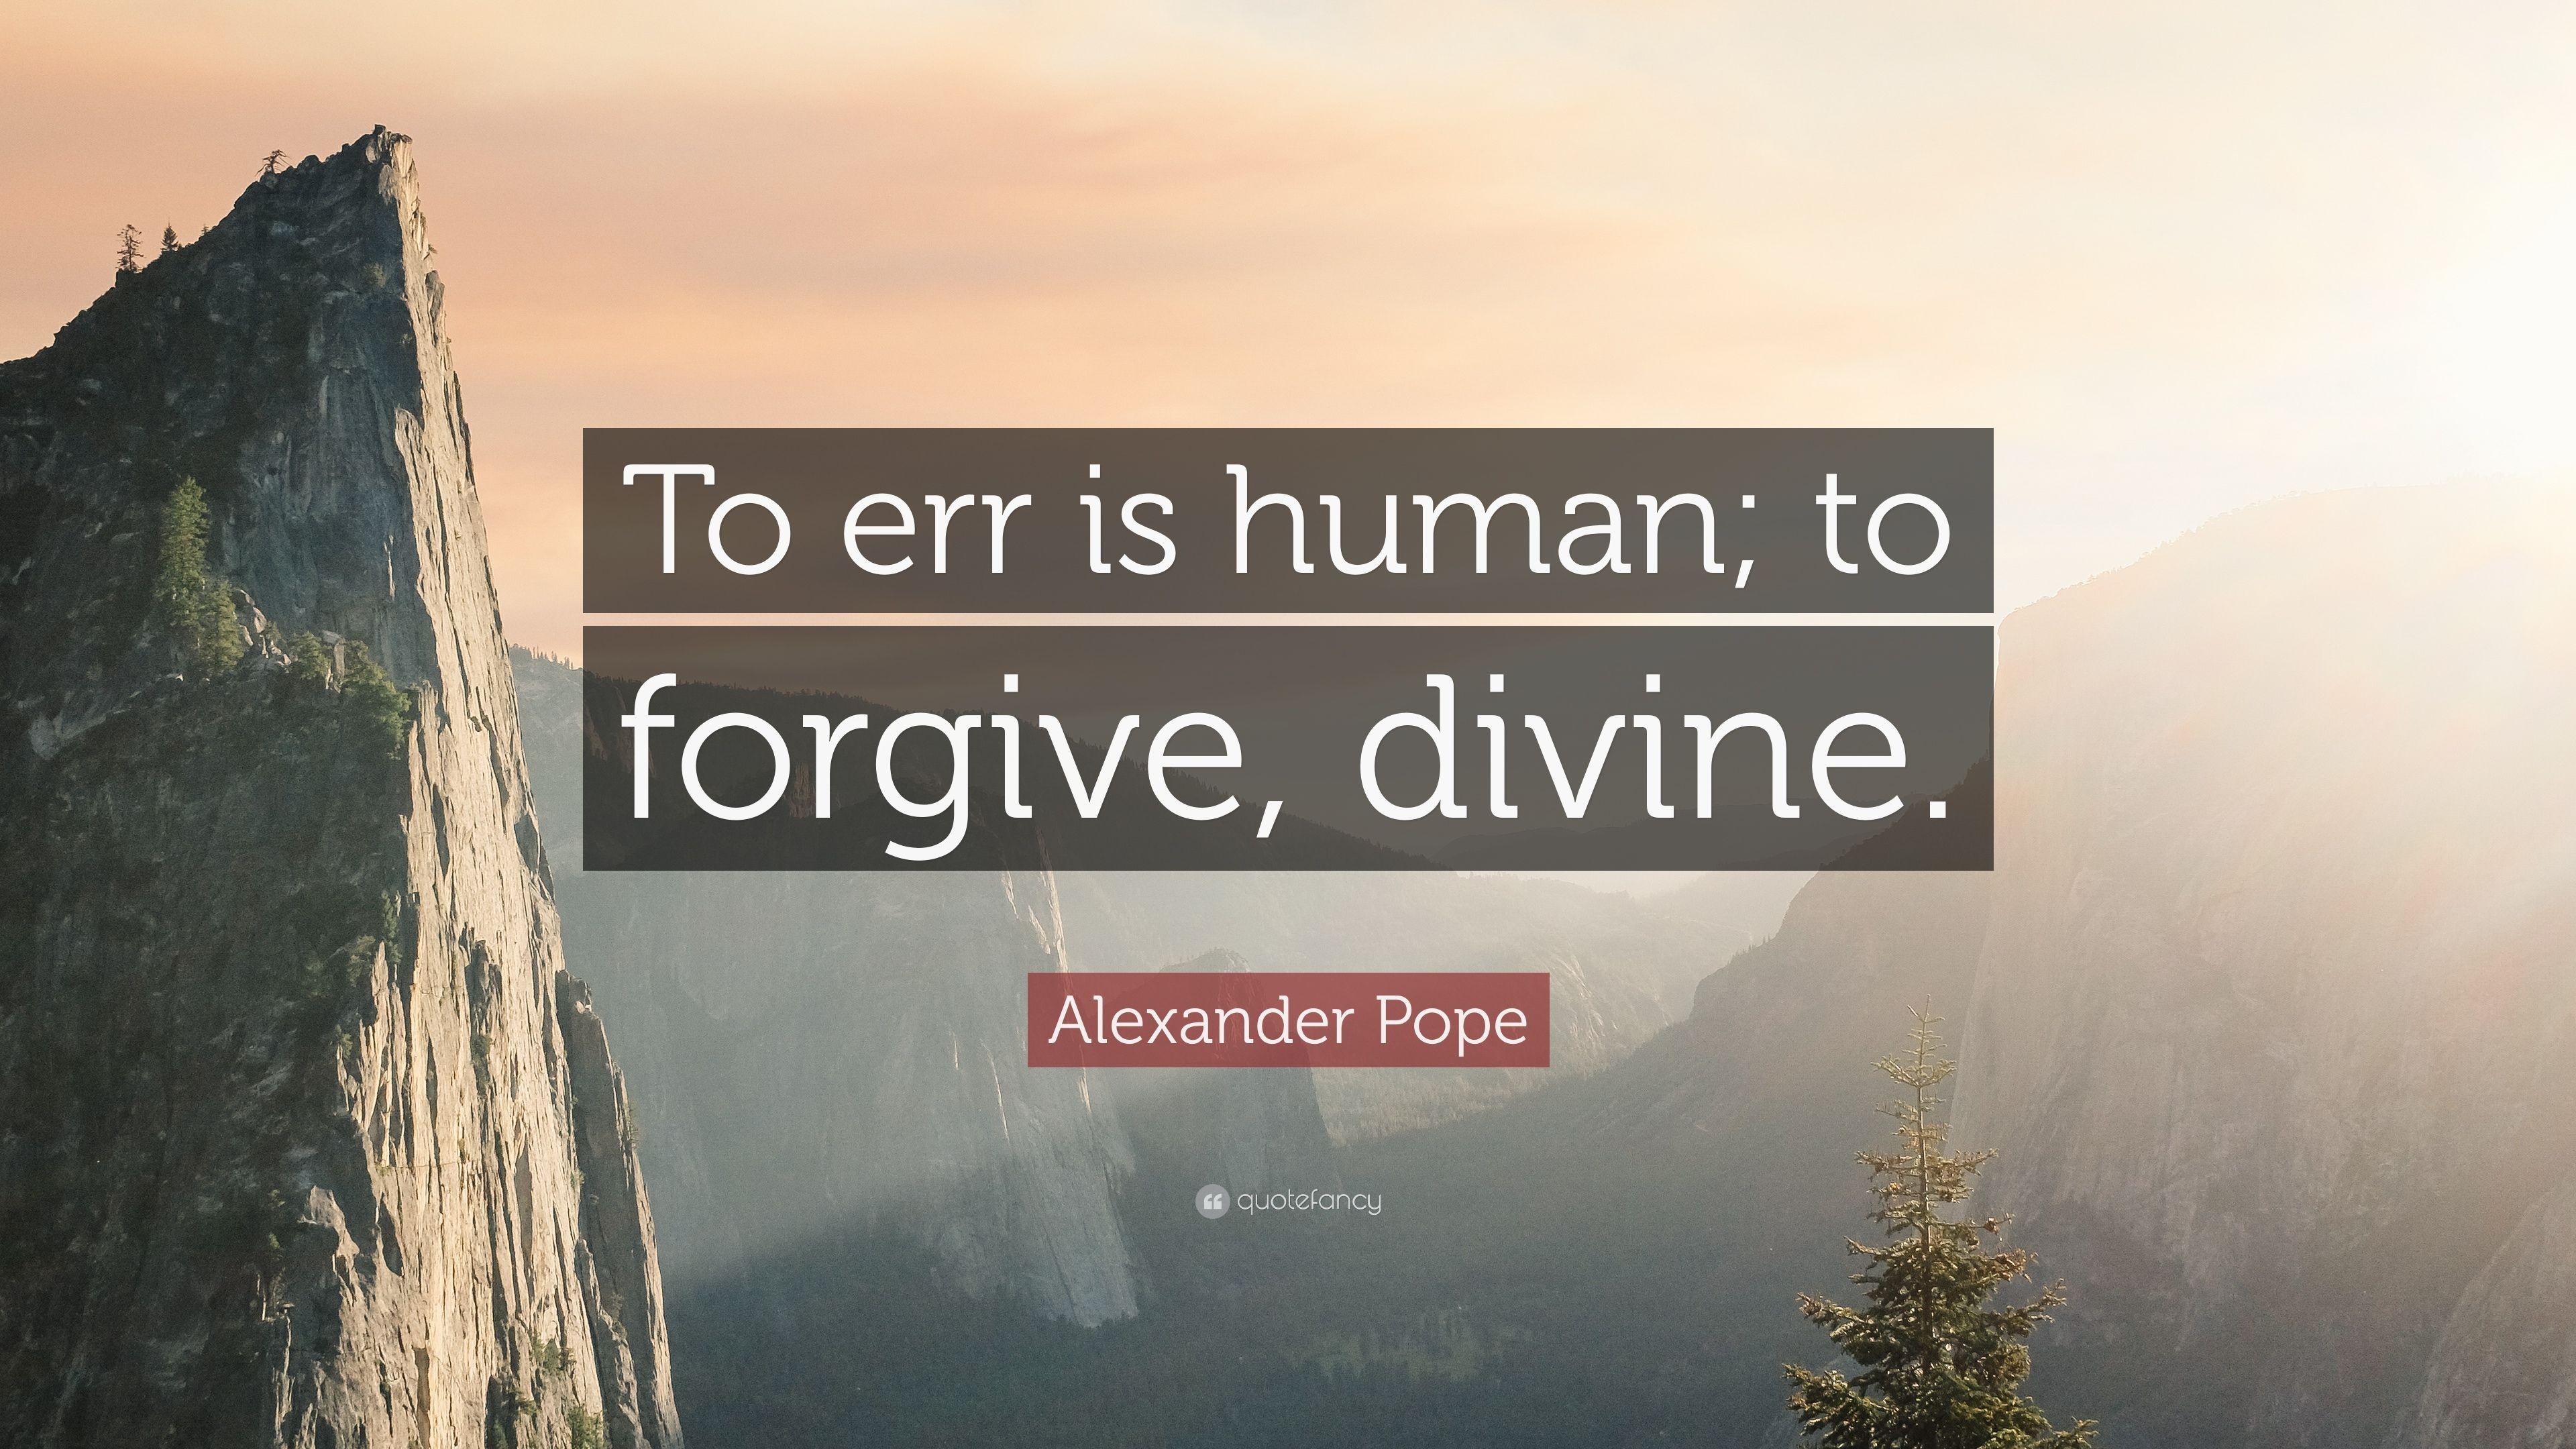 Alexander Pope Quote: “To err is human; to forgive, divine.” 20